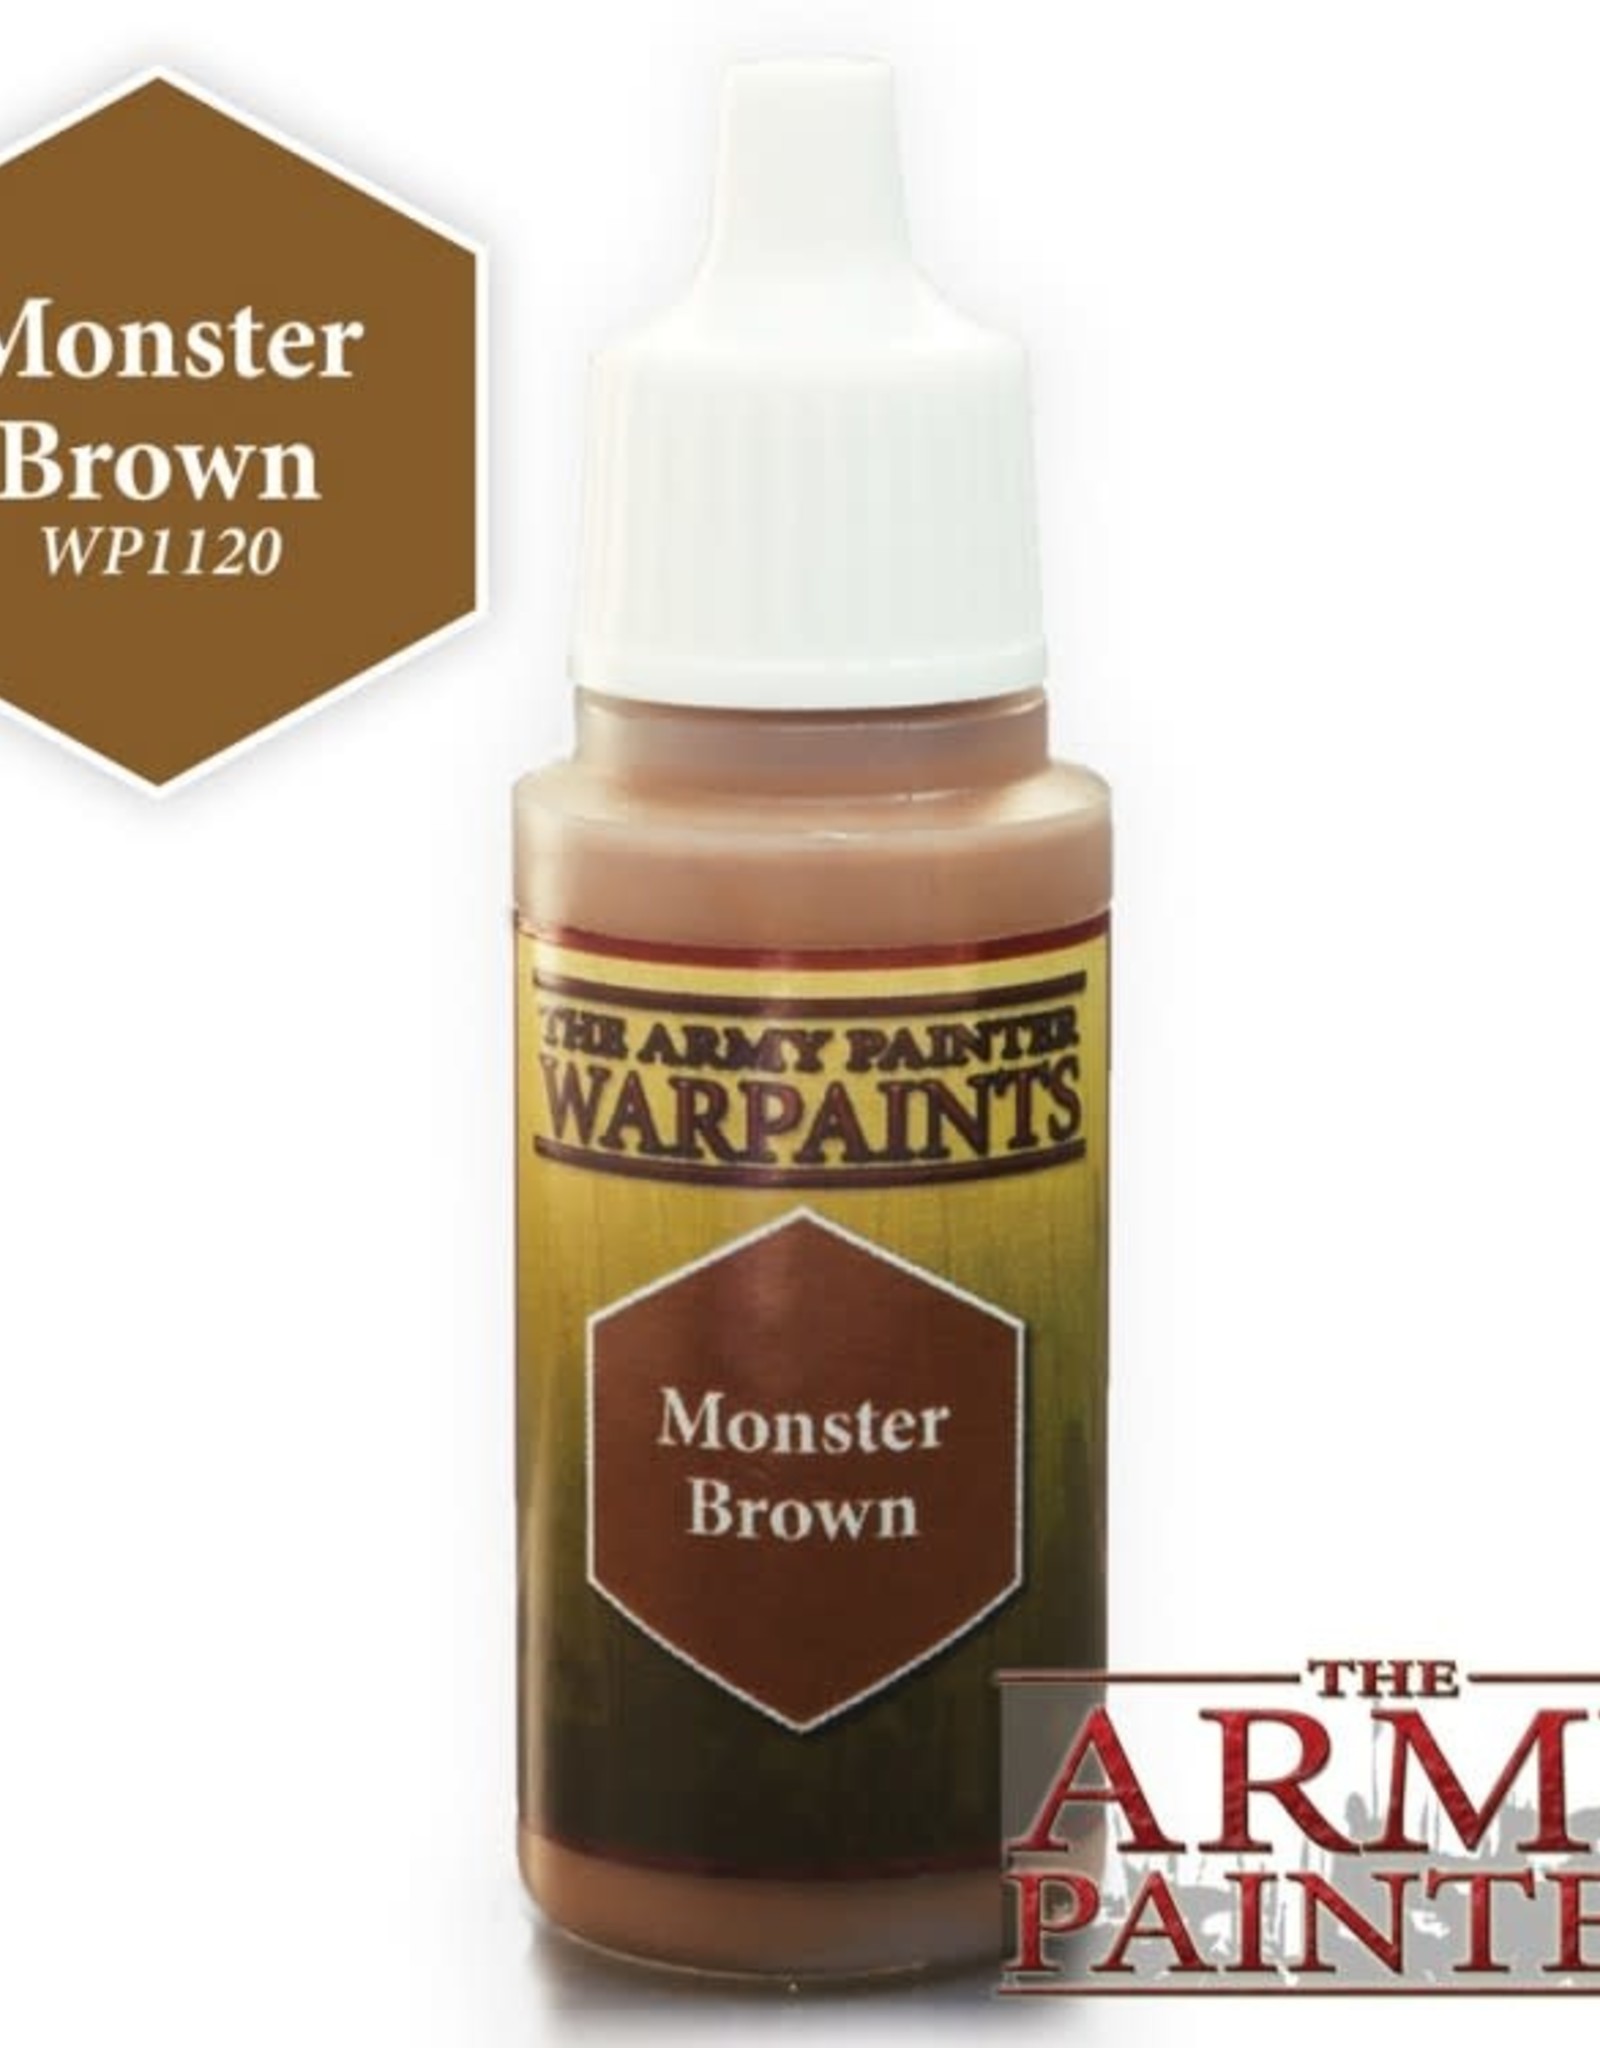 The Army Painter Warpaints - Monster Brown